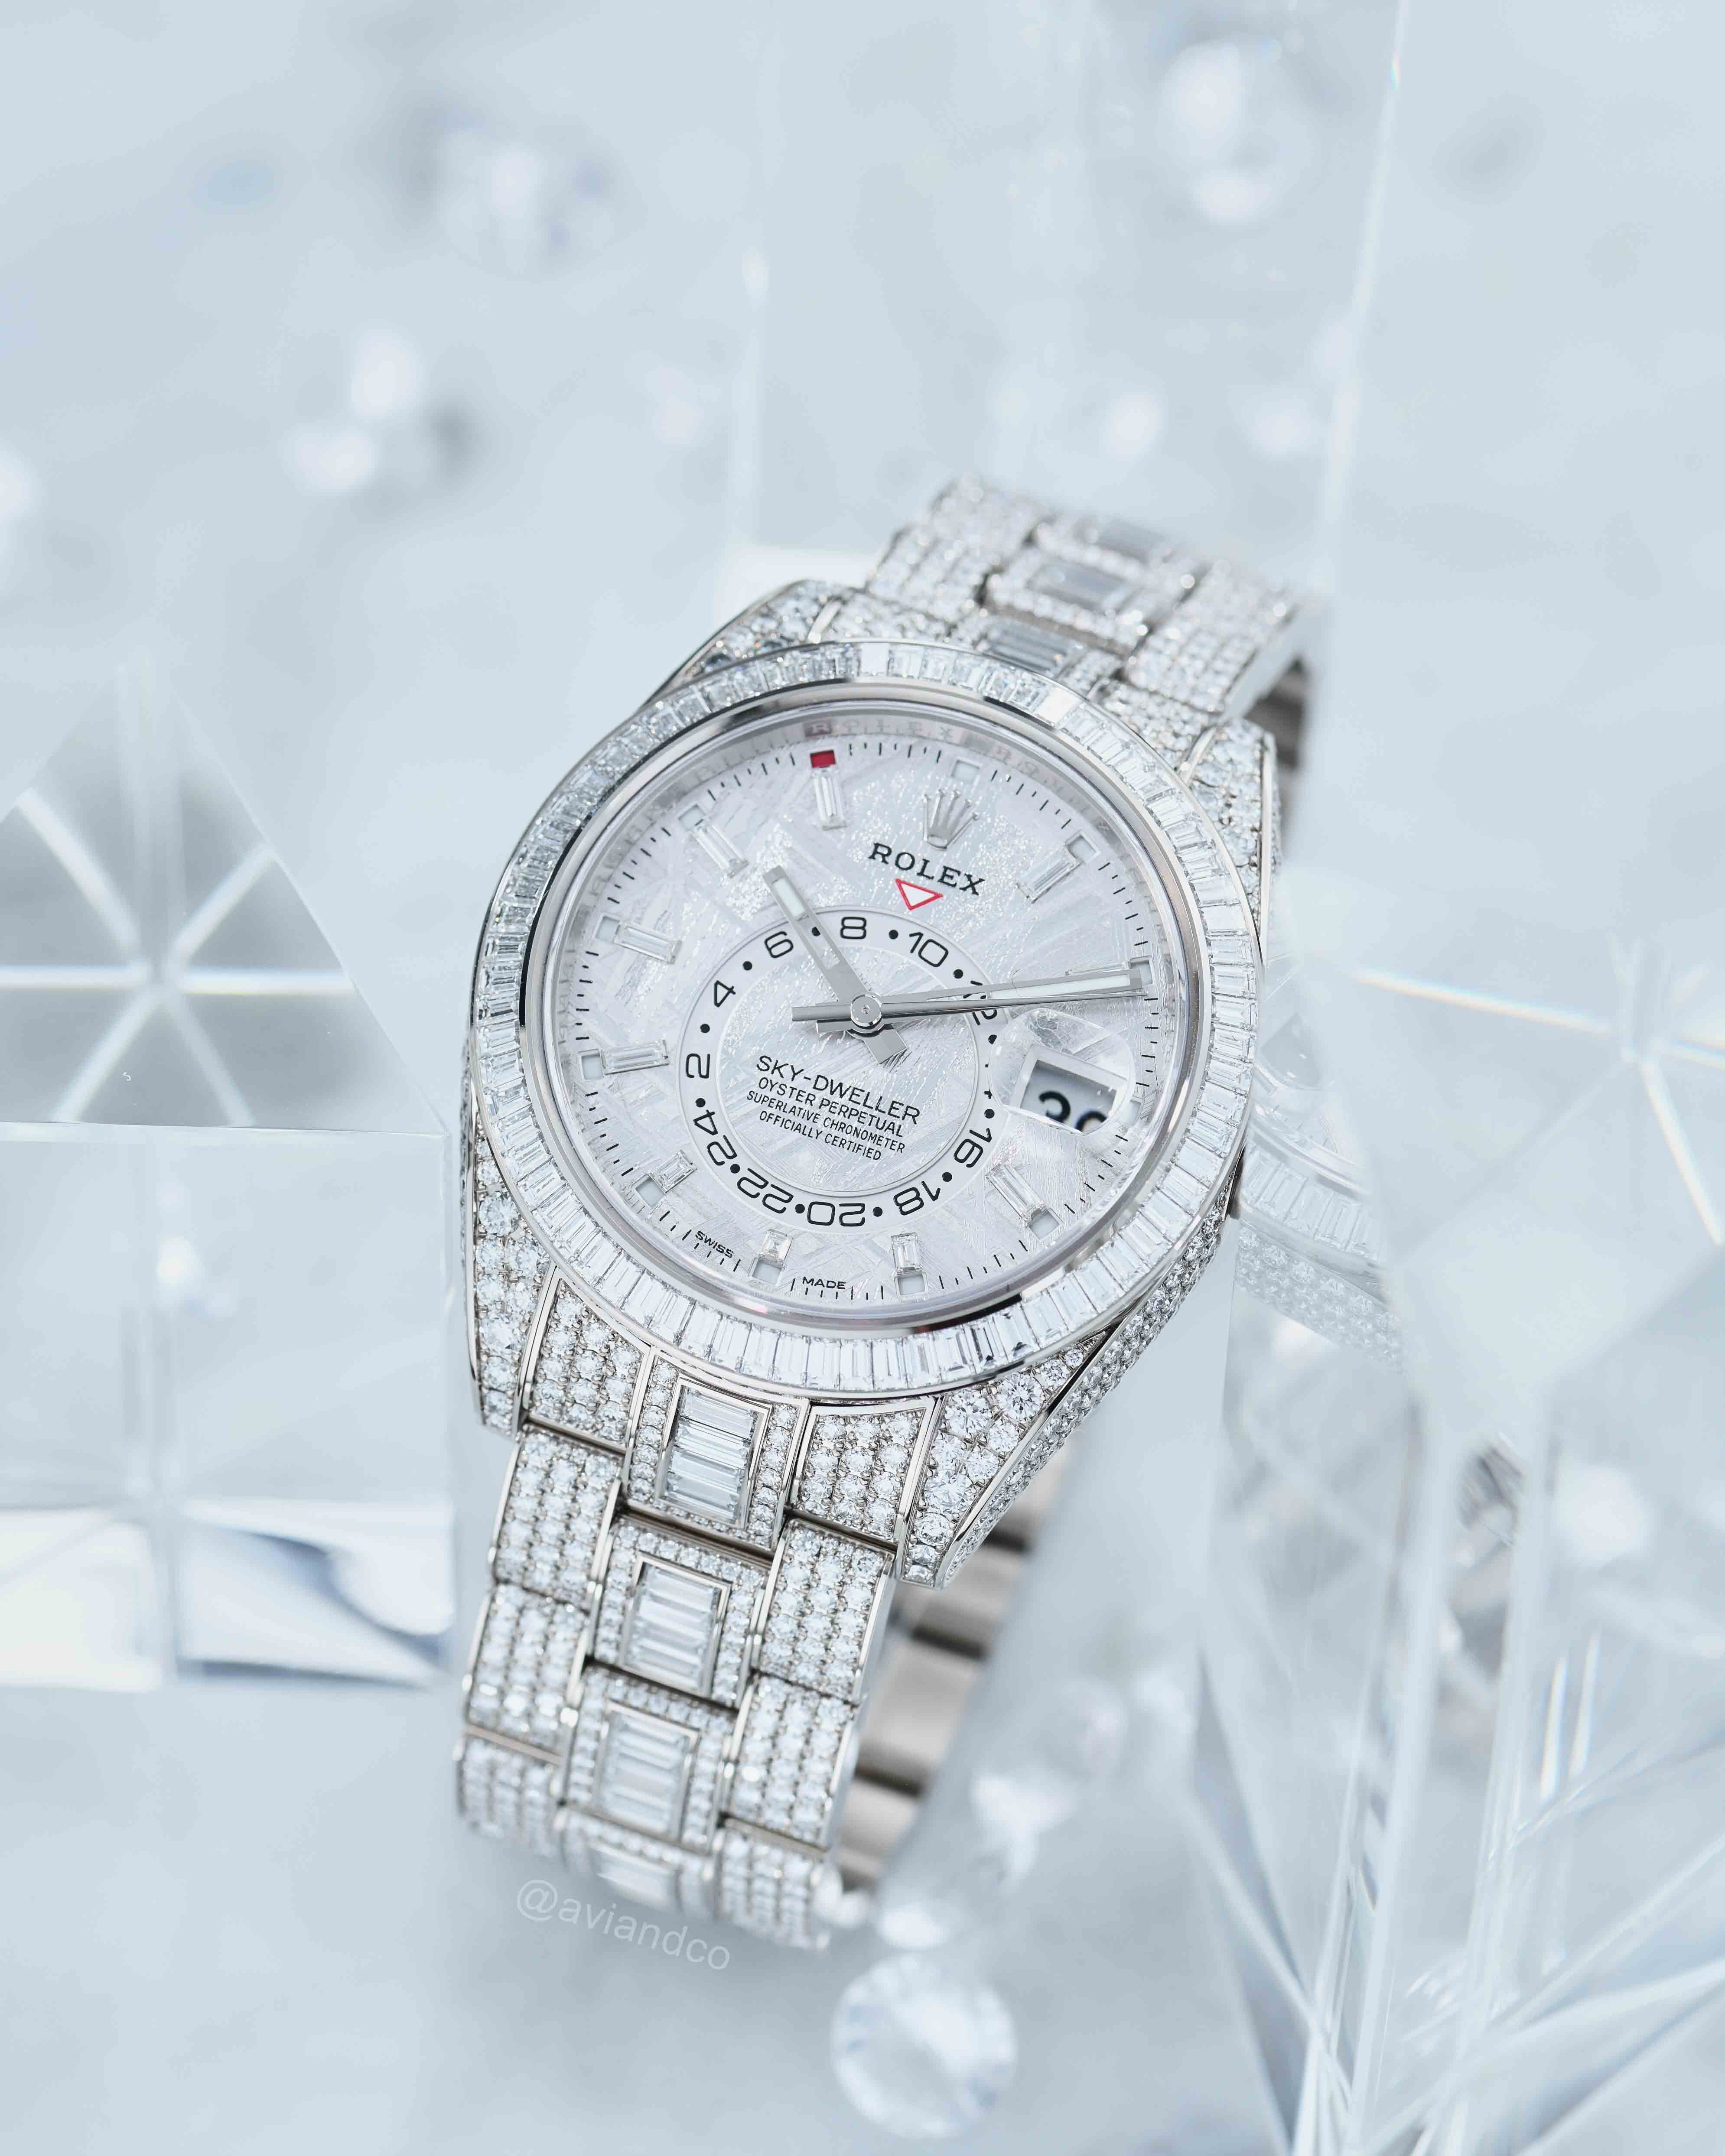 White Dial and Pave Diamond Timepiece on a Clear Snowy-Colored Background.